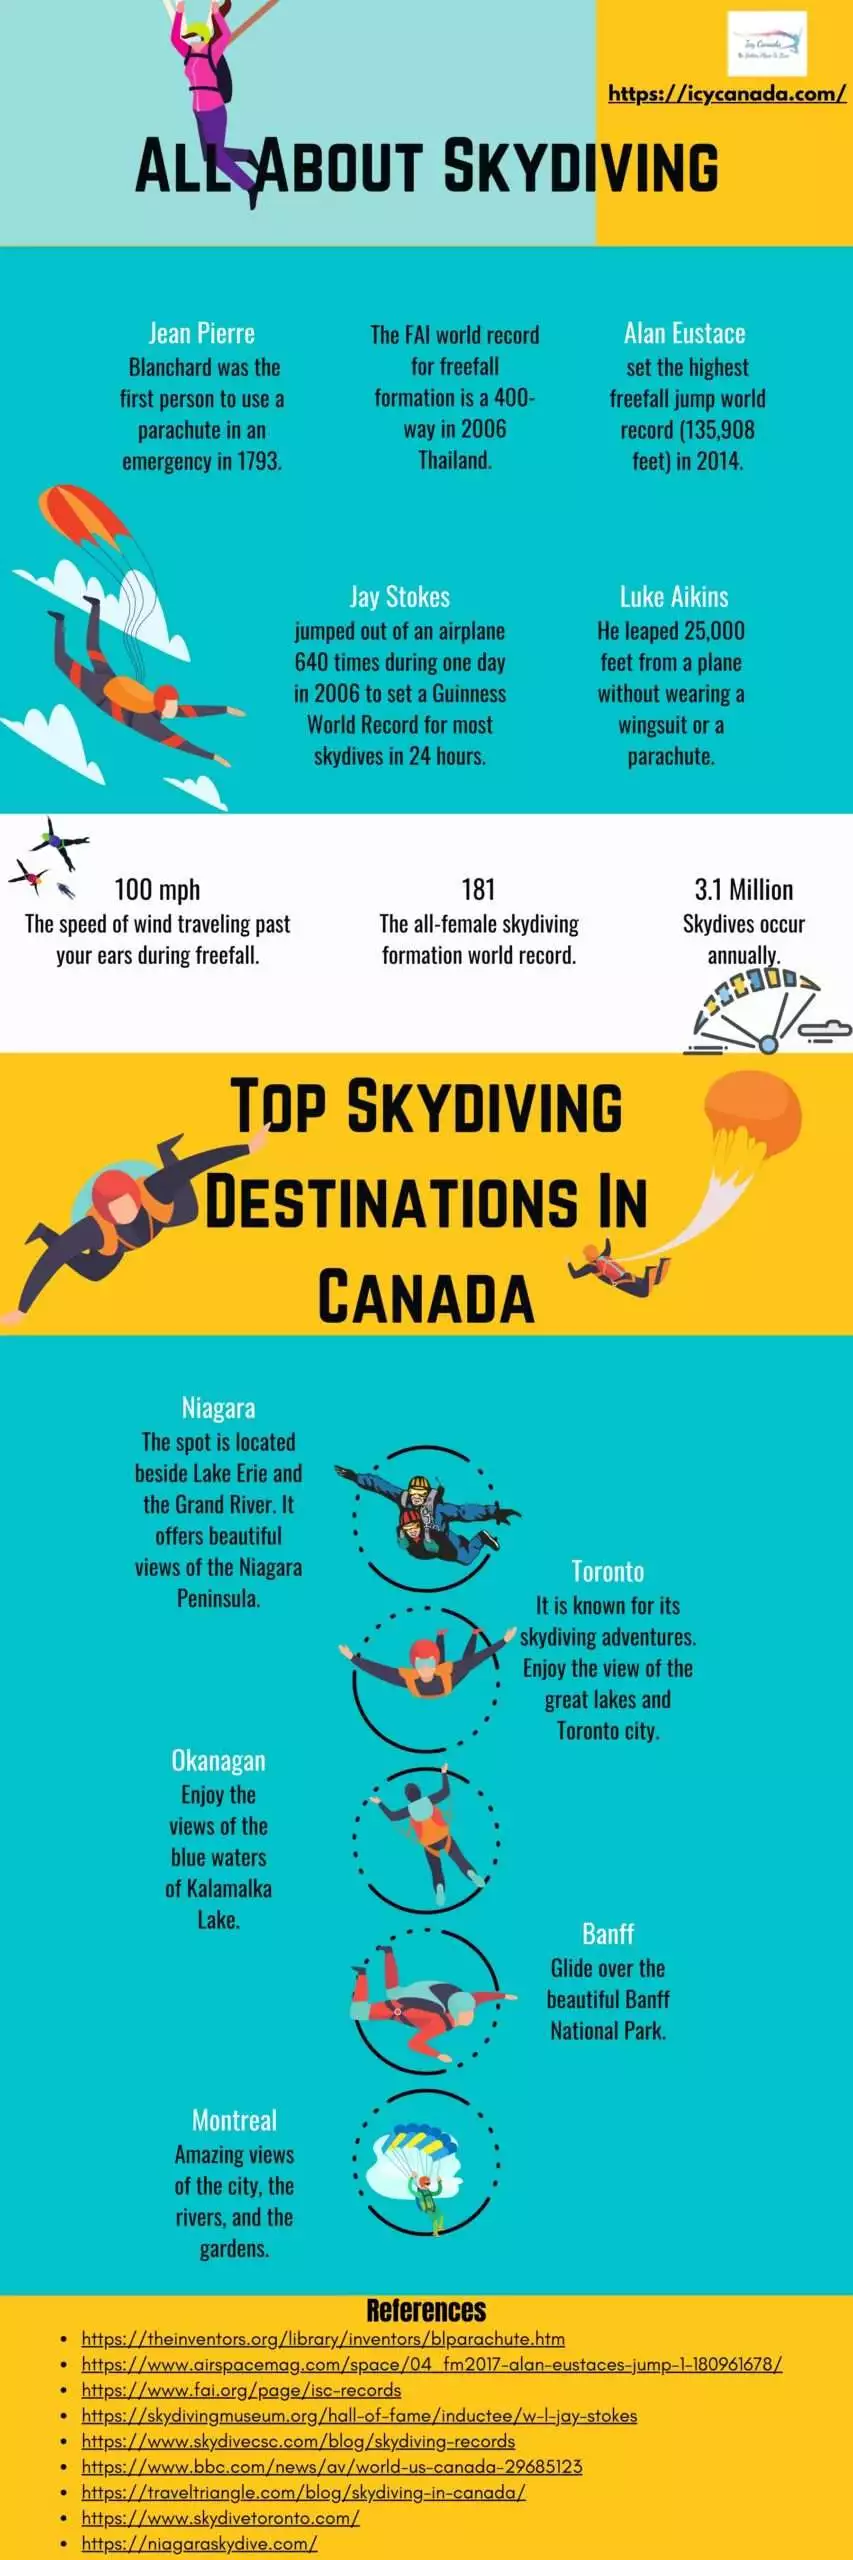 All About Skydiving